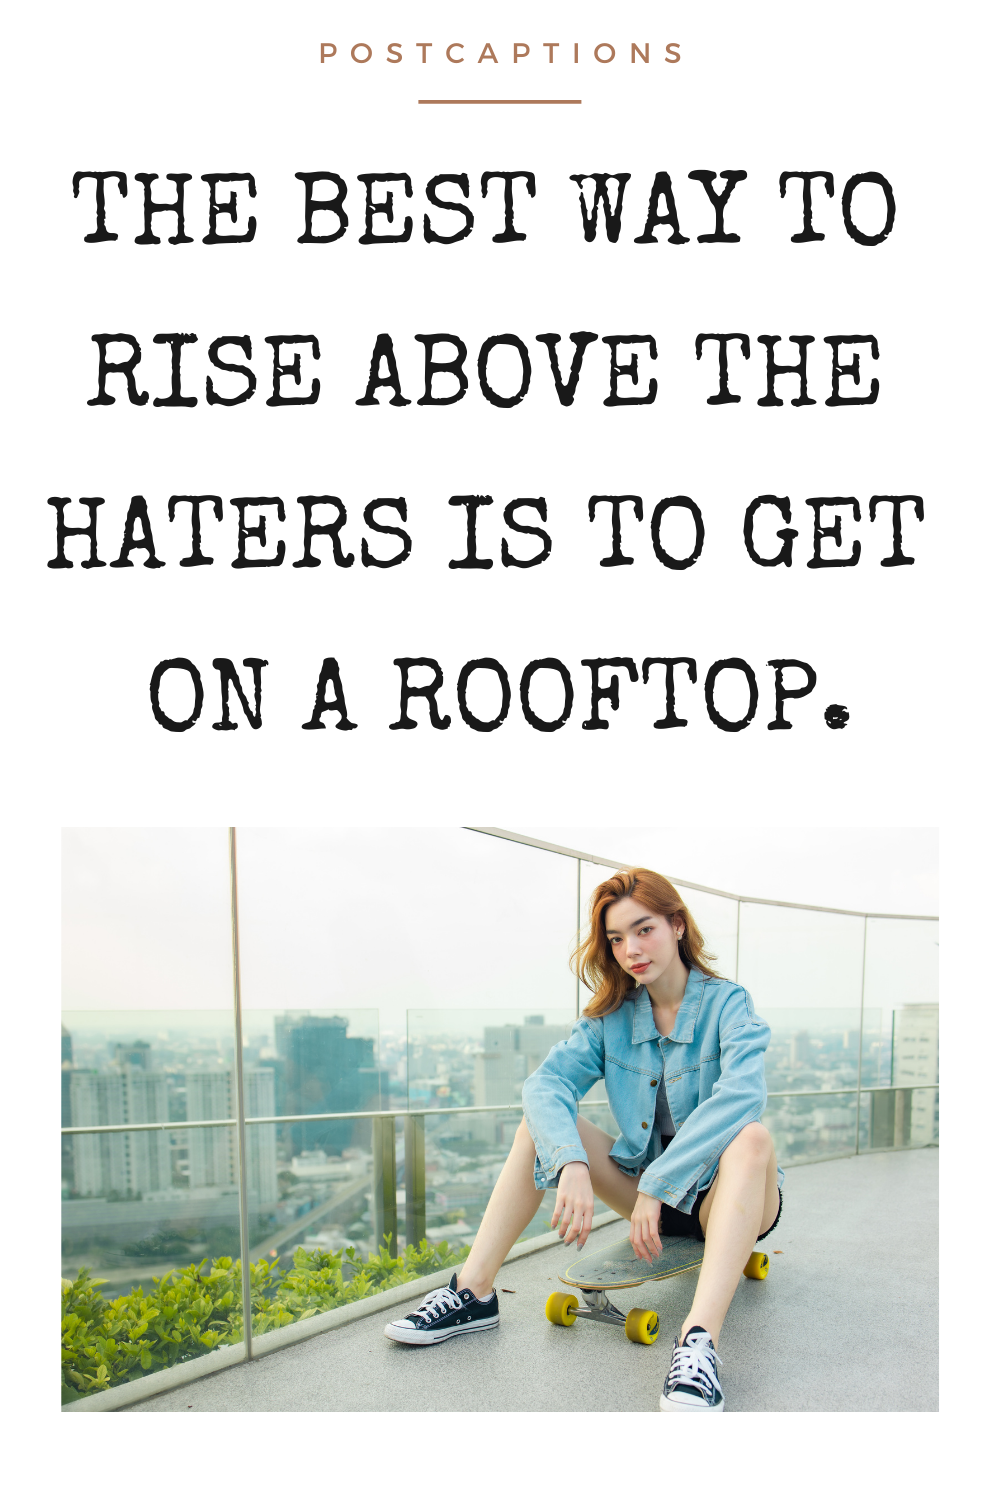 Funny Rooftop captions 